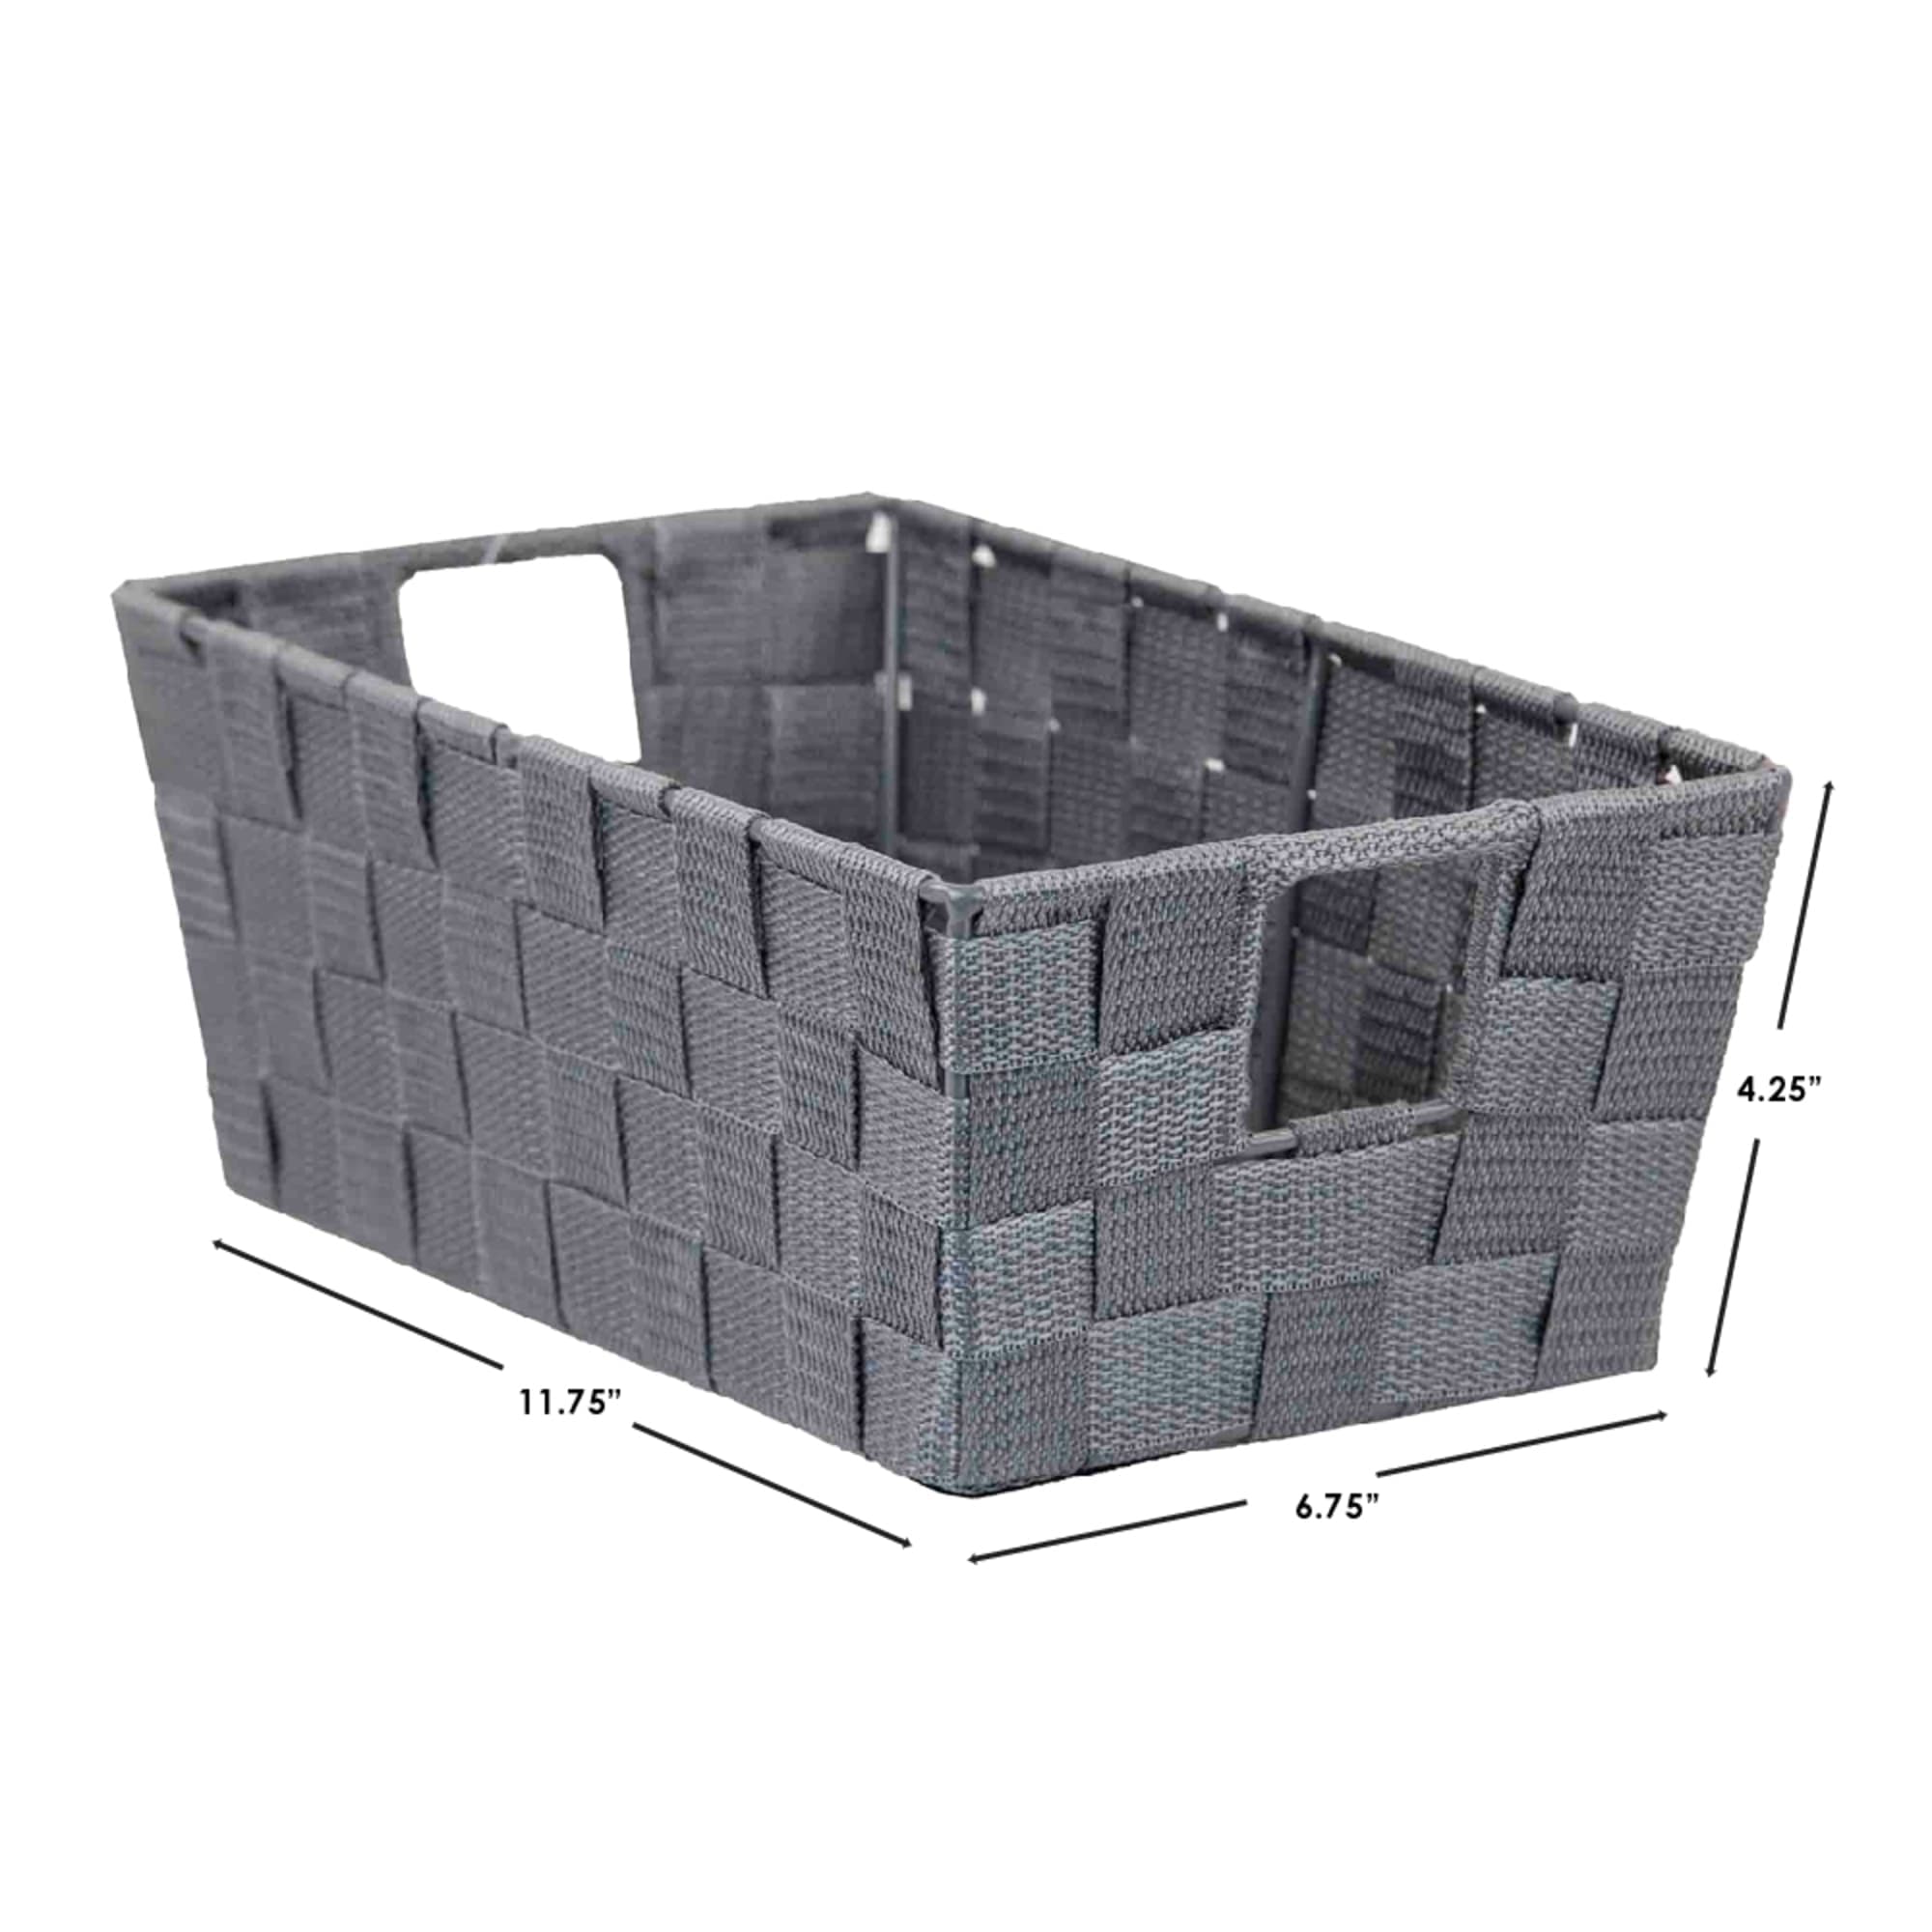 Home Basics Small Double Woven Polyester Strap Open Bin with Sturdy Steel Frame and Cut-out Handles, Grey $3.00 EACH, CASE PACK OF 6